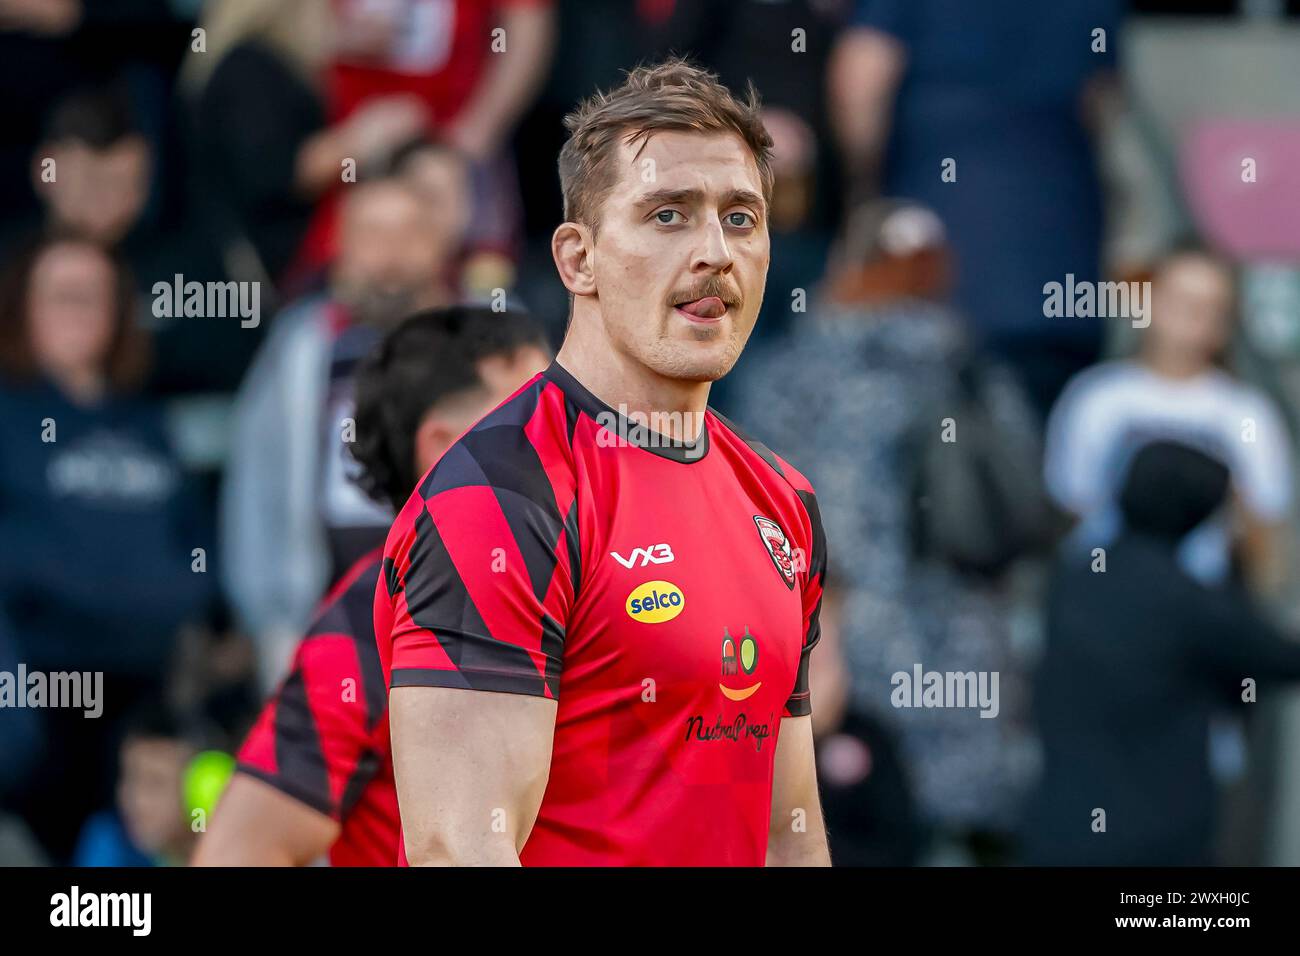 Salford, Manchester, UK. 30th March, 2024. Super League Rugby: Salford Red Devils Vs Leigh Leopards at Salford Community Stadium. ANDREW DIXON pre game warm up. Credit James Giblin/Alamy Live News. Stock Photo